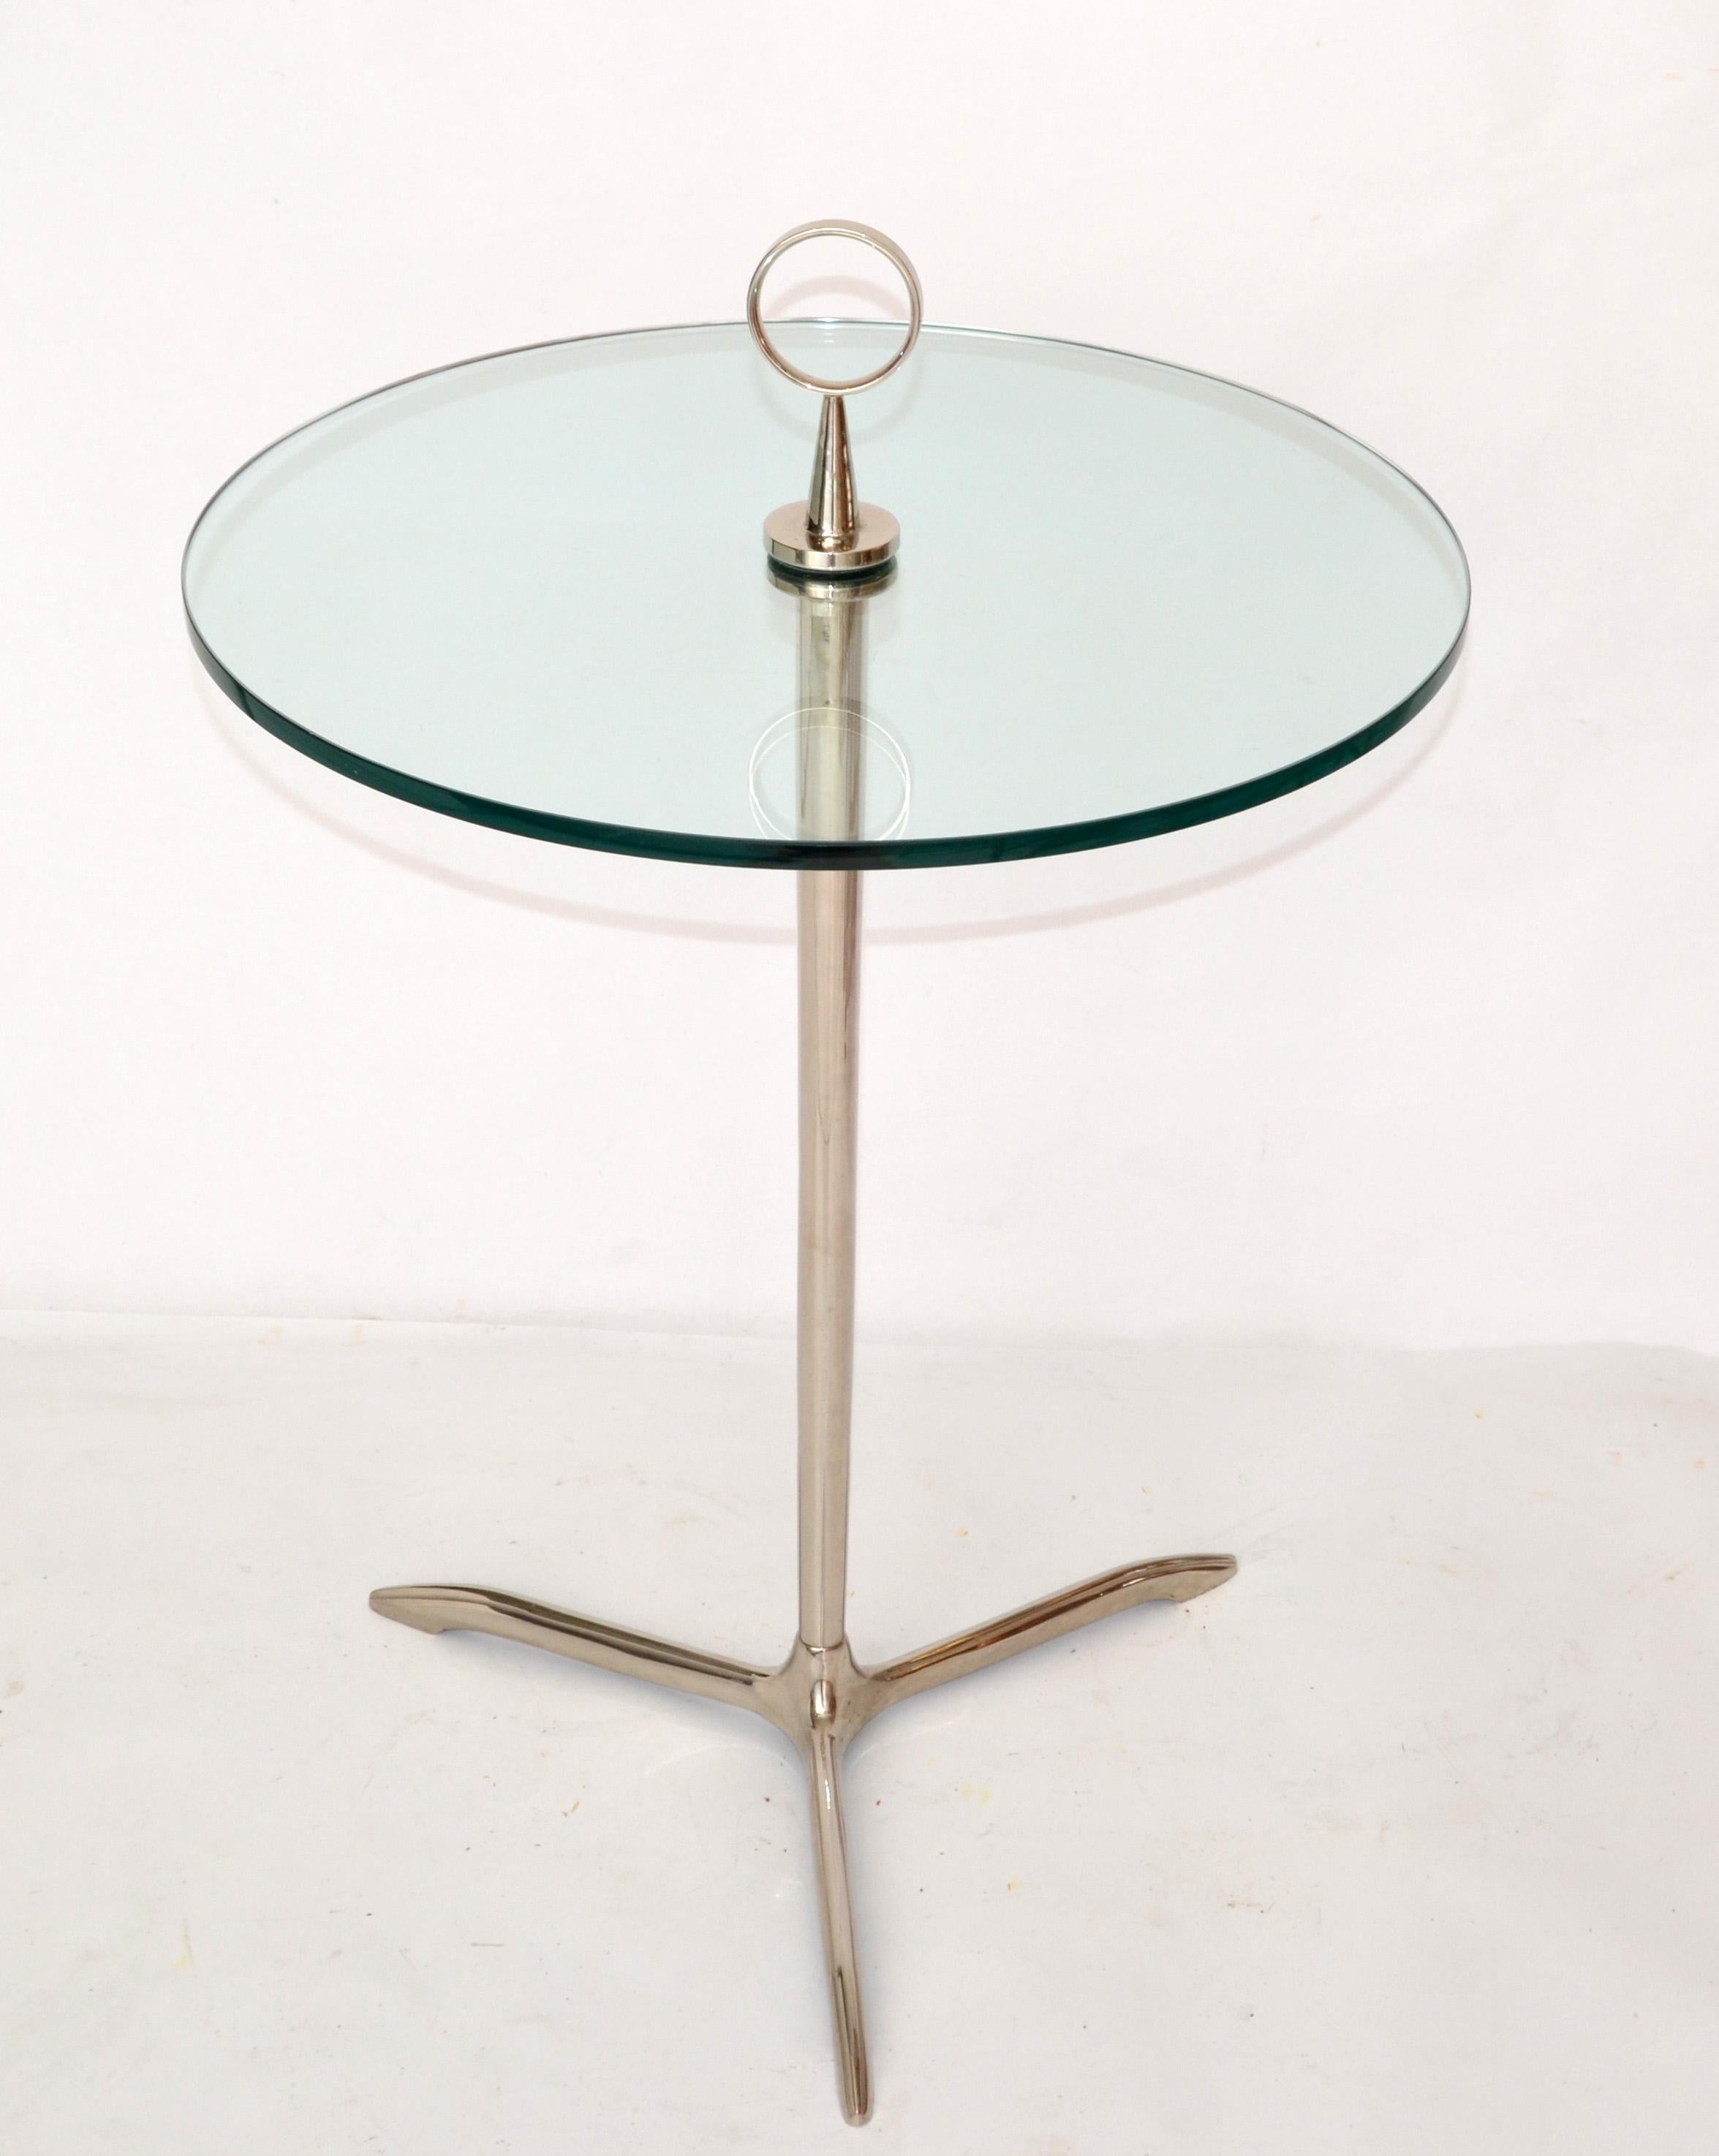 Cesare Lacca Style Stainless Steel & Round Glass Tripod Side Table, Italy, 1950 For Sale 5